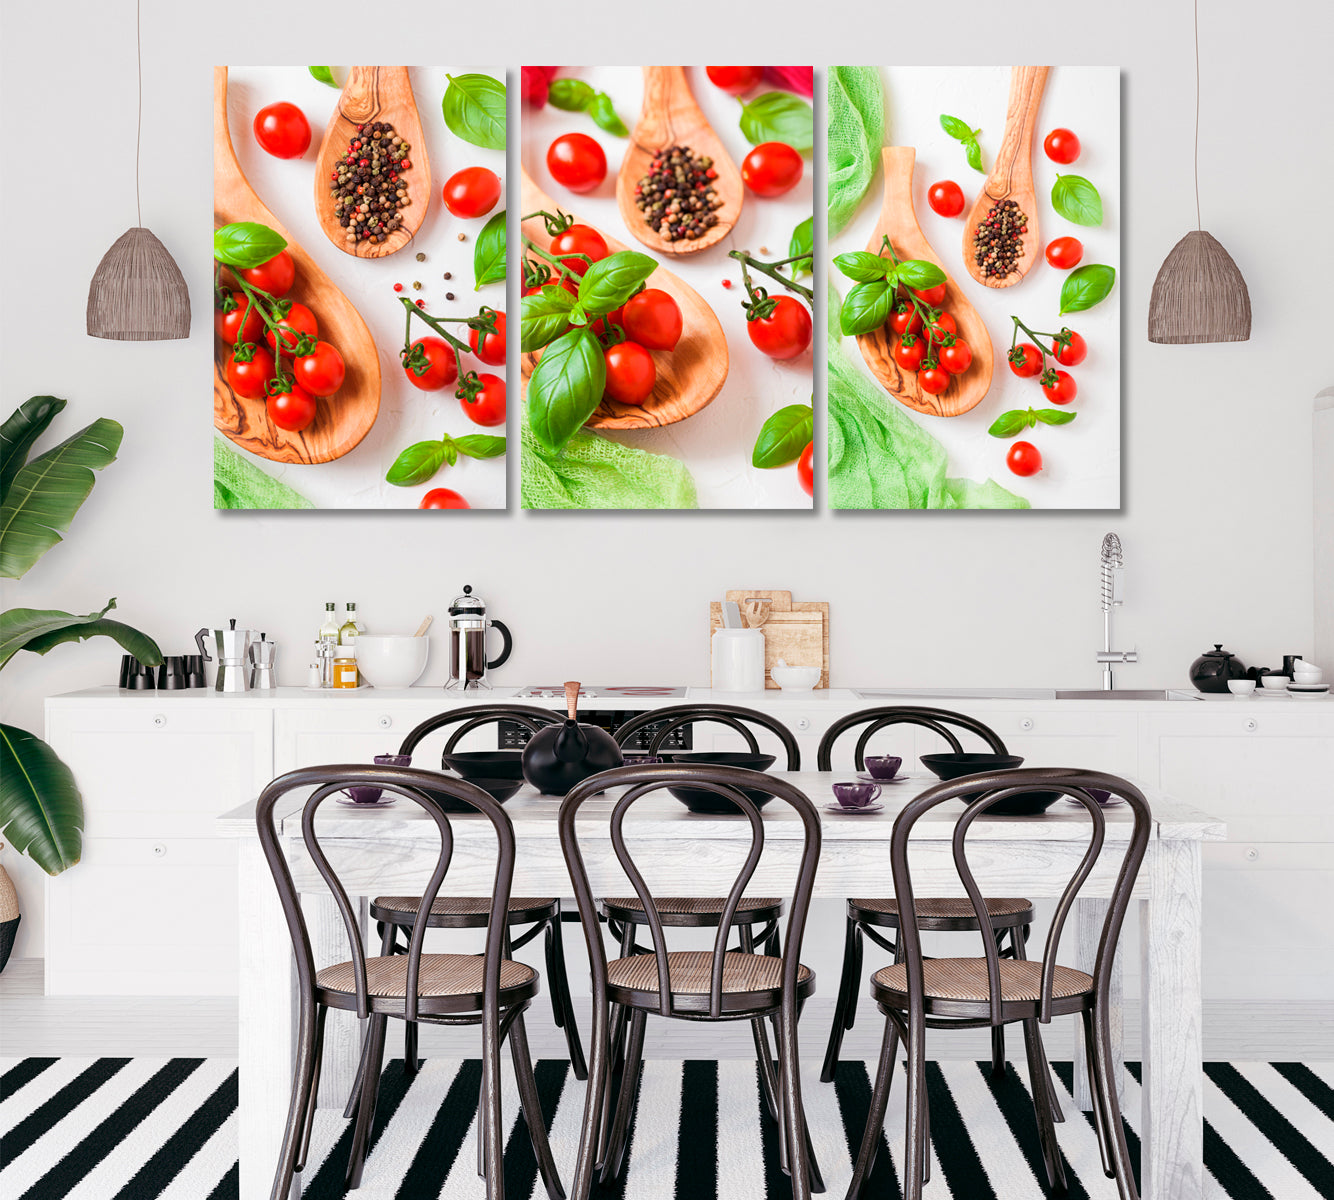 Set of 3 Sugardrop Tomatoes and Black Pepper Canvas Print ArtLexy   